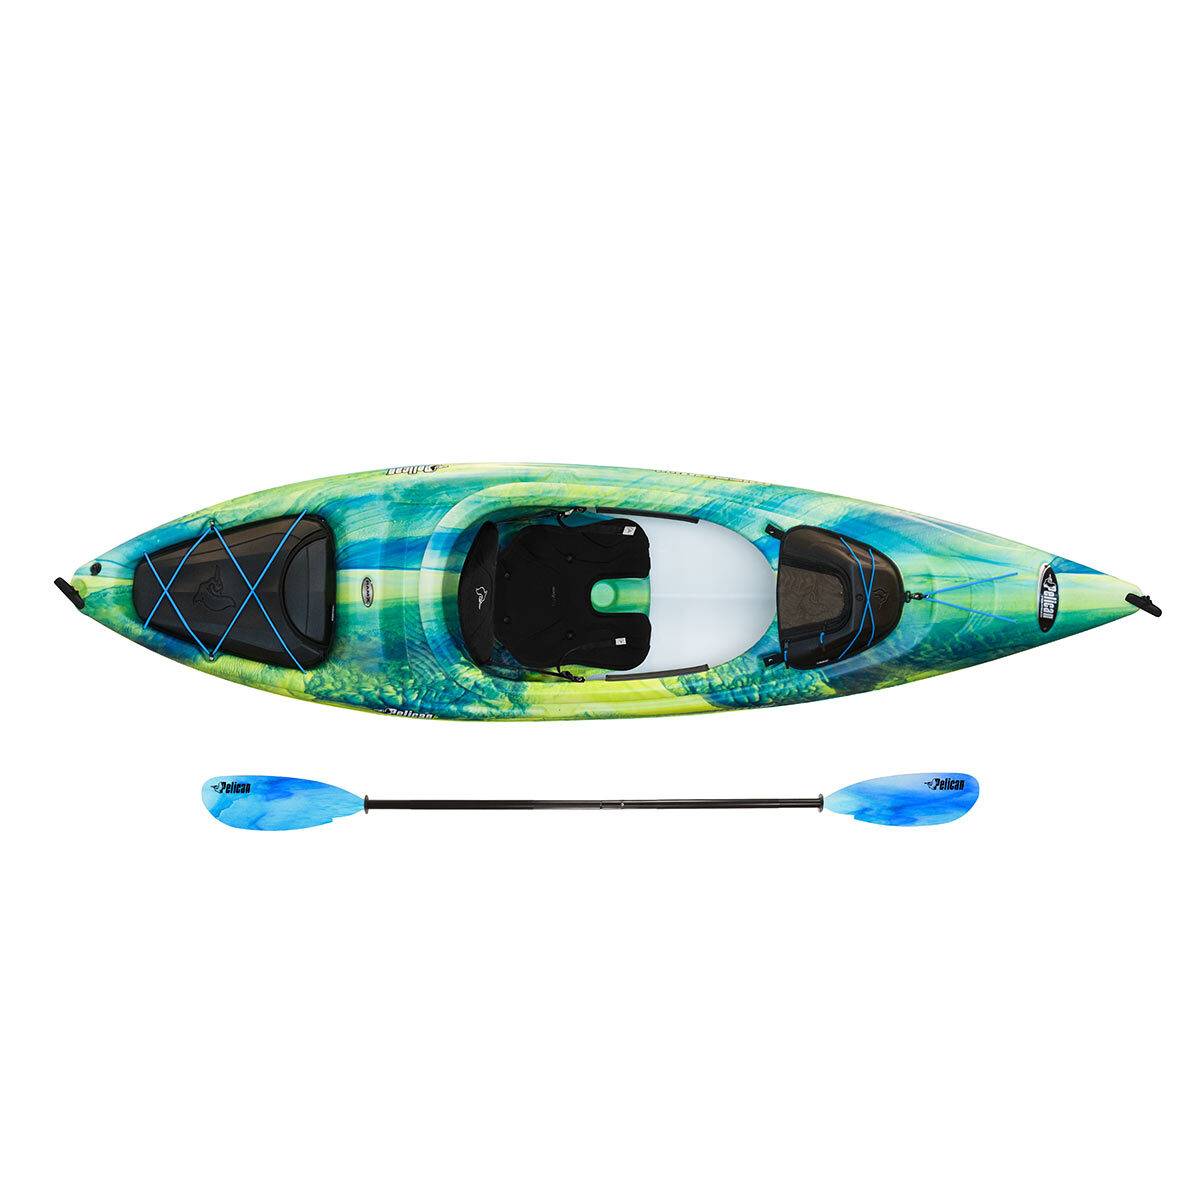 Pelican™ Mission 10ft 100X Sit-In Kayak and Paddle